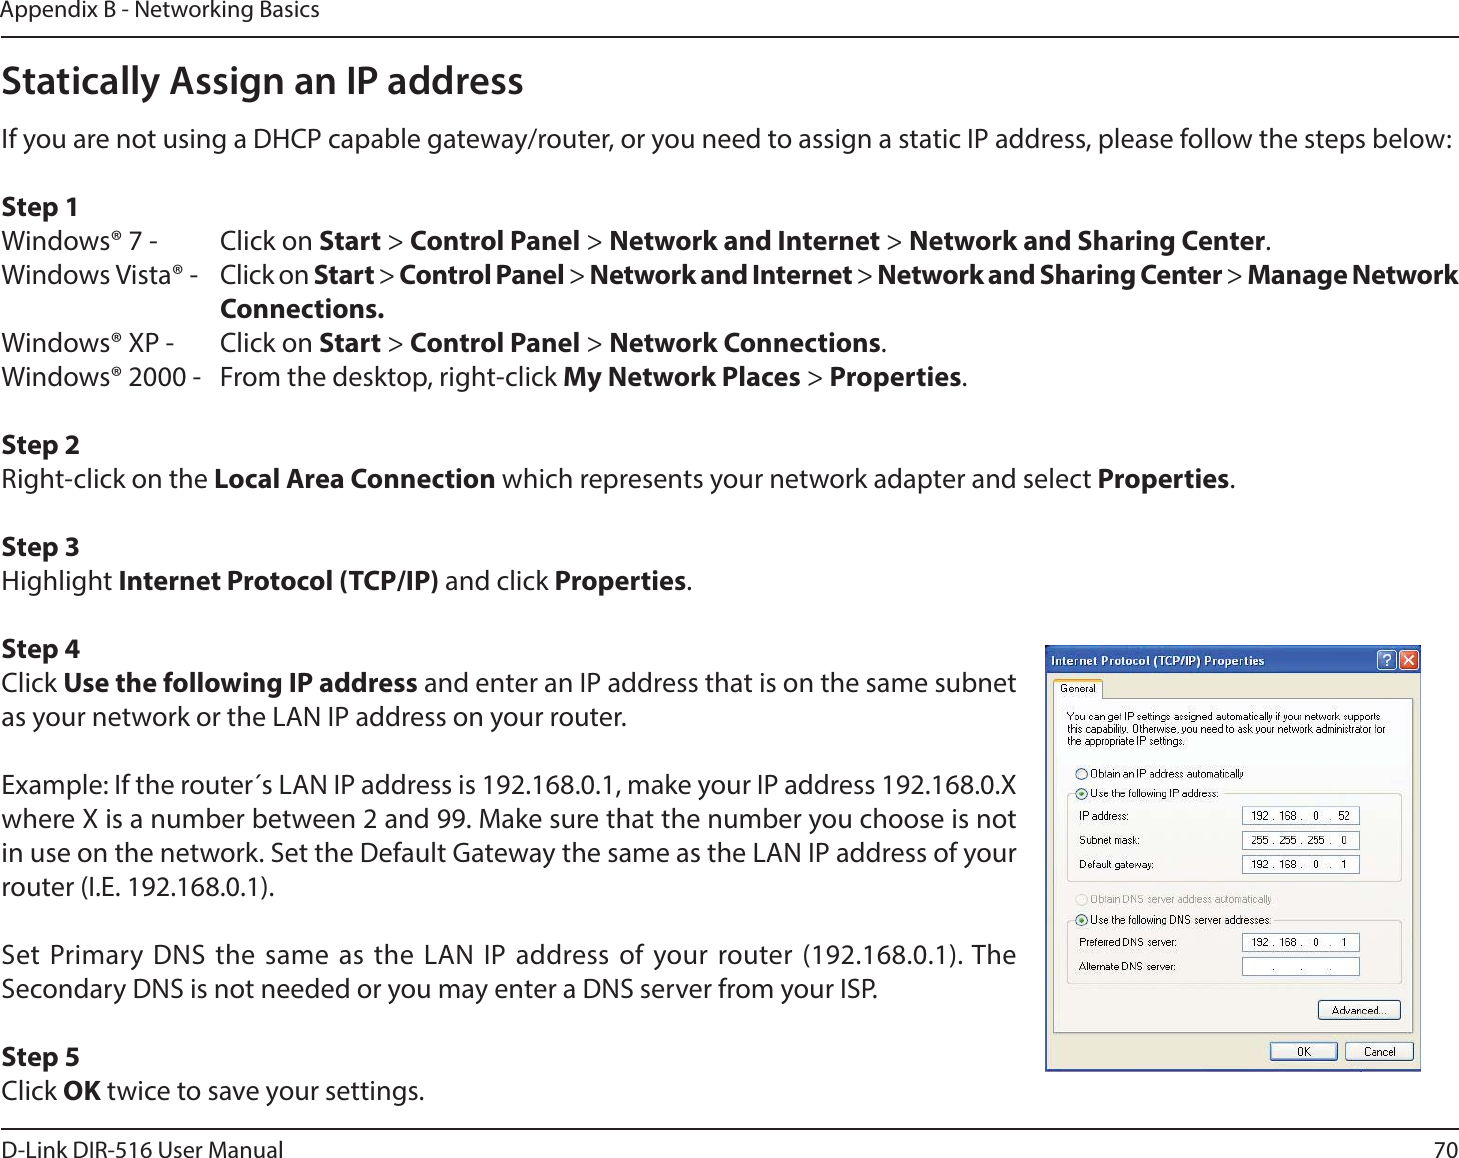 70D-Link DIR-516 User ManualAppendix B - Networking BasicsStatically Assign an IP addressIf you are not using a DHCP capable gateway/router, or you need to assign a static IP address, please follow the steps below:Step 1Windows® 7 -  Click on Start &gt; Control Panel &gt; Network and Internet &gt; Network and Sharing Center.Windows Vista® -  Click on Start &gt; Control Panel &gt; Network and Internet &gt; Network and Sharing Center &gt; Manage Network     Connections.Windows® XP -  Click on Start &gt; Control Panel &gt; Network Connections.Windows® 2000 -  From the desktop, right-click My Network Places &gt; Properties.Step 2Right-click on the Local Area Connection which represents your network adapter and select Properties.Step 3Highlight Internet Protocol (TCP/IP) and click Properties.Step 4Click Use the following IP address and enter an IP address that is on the same subnet as your network or the LAN IP address on your router. Example: If the router´s LAN IP address is 192.168.0.1, make your IP address 192.168.0.X where X is a number between 2 and 99. Make sure that the number you choose is not in use on the network. Set the Default Gateway the same as the LAN IP address of your router (I.E. 192.168.0.1). Set Primary DNS the same as the LAN IP address of your router (192.168.0.1). The Secondary DNS is not needed or you may enter a DNS server from your ISP.Step 5Click OK twice to save your settings.